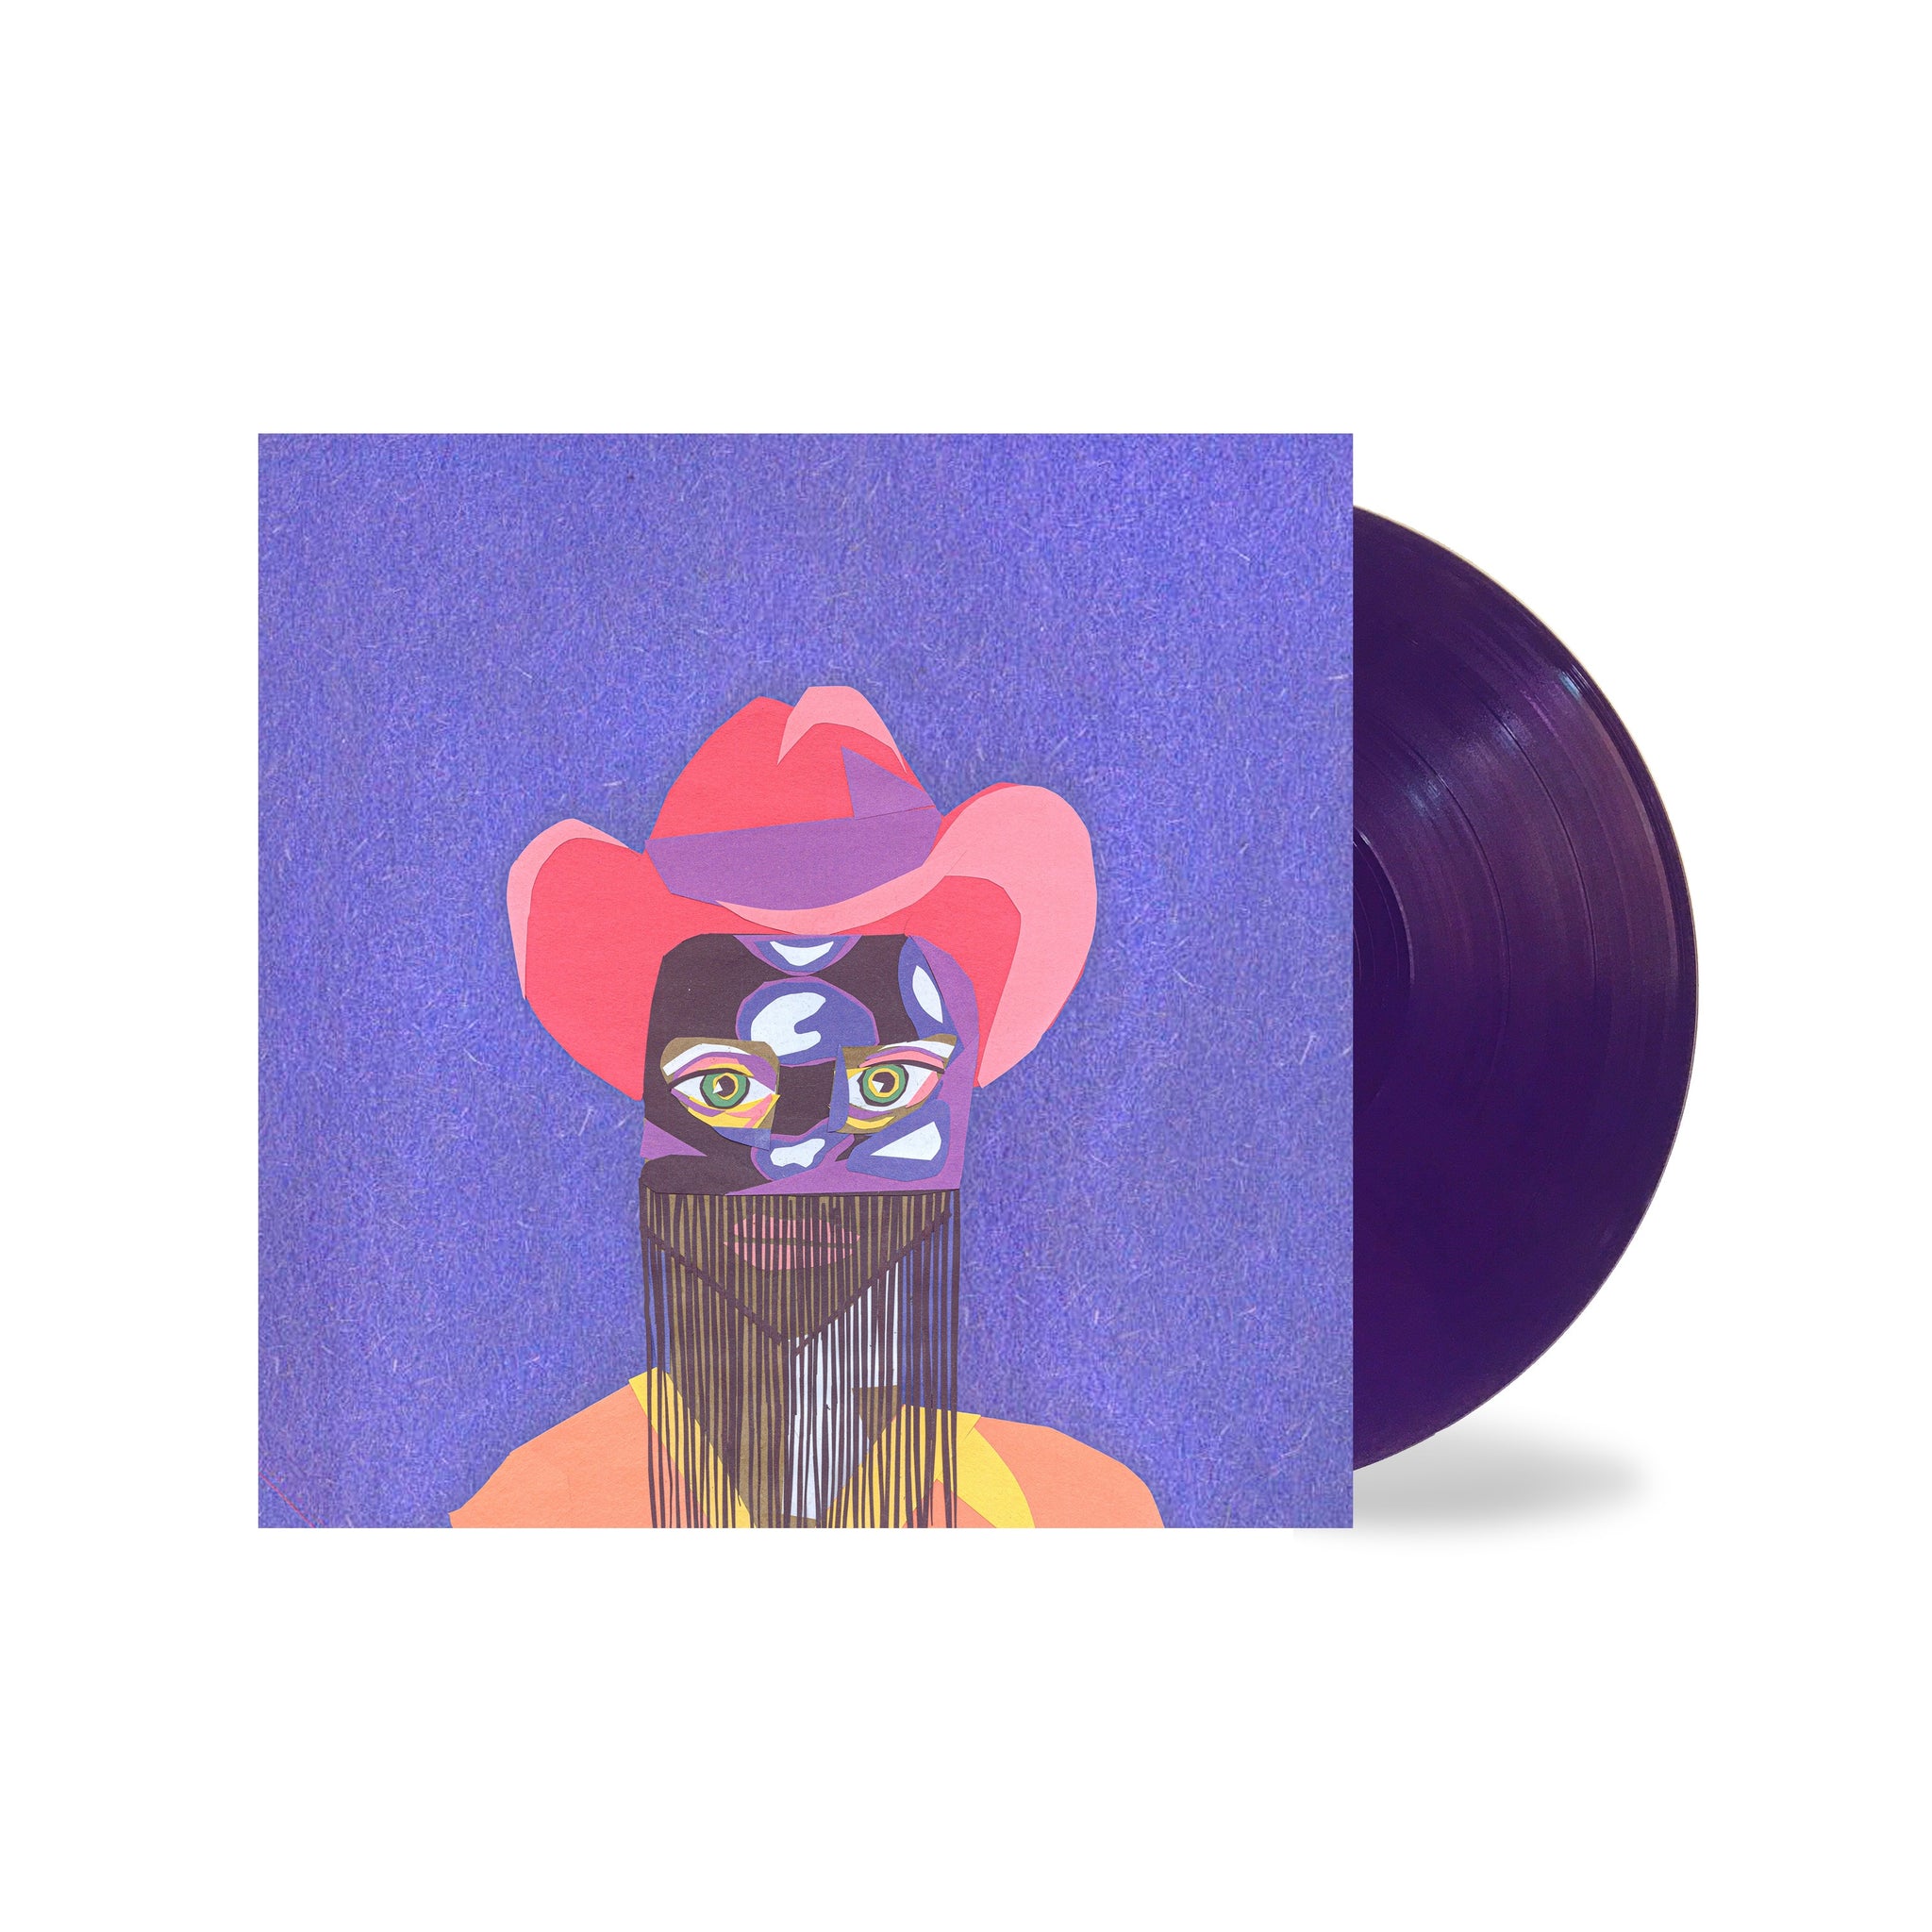 Orville Peck - Show Pony - New EP Record 2020 Columbia Purple Vinyl, Poster & Sticker - Country Rock